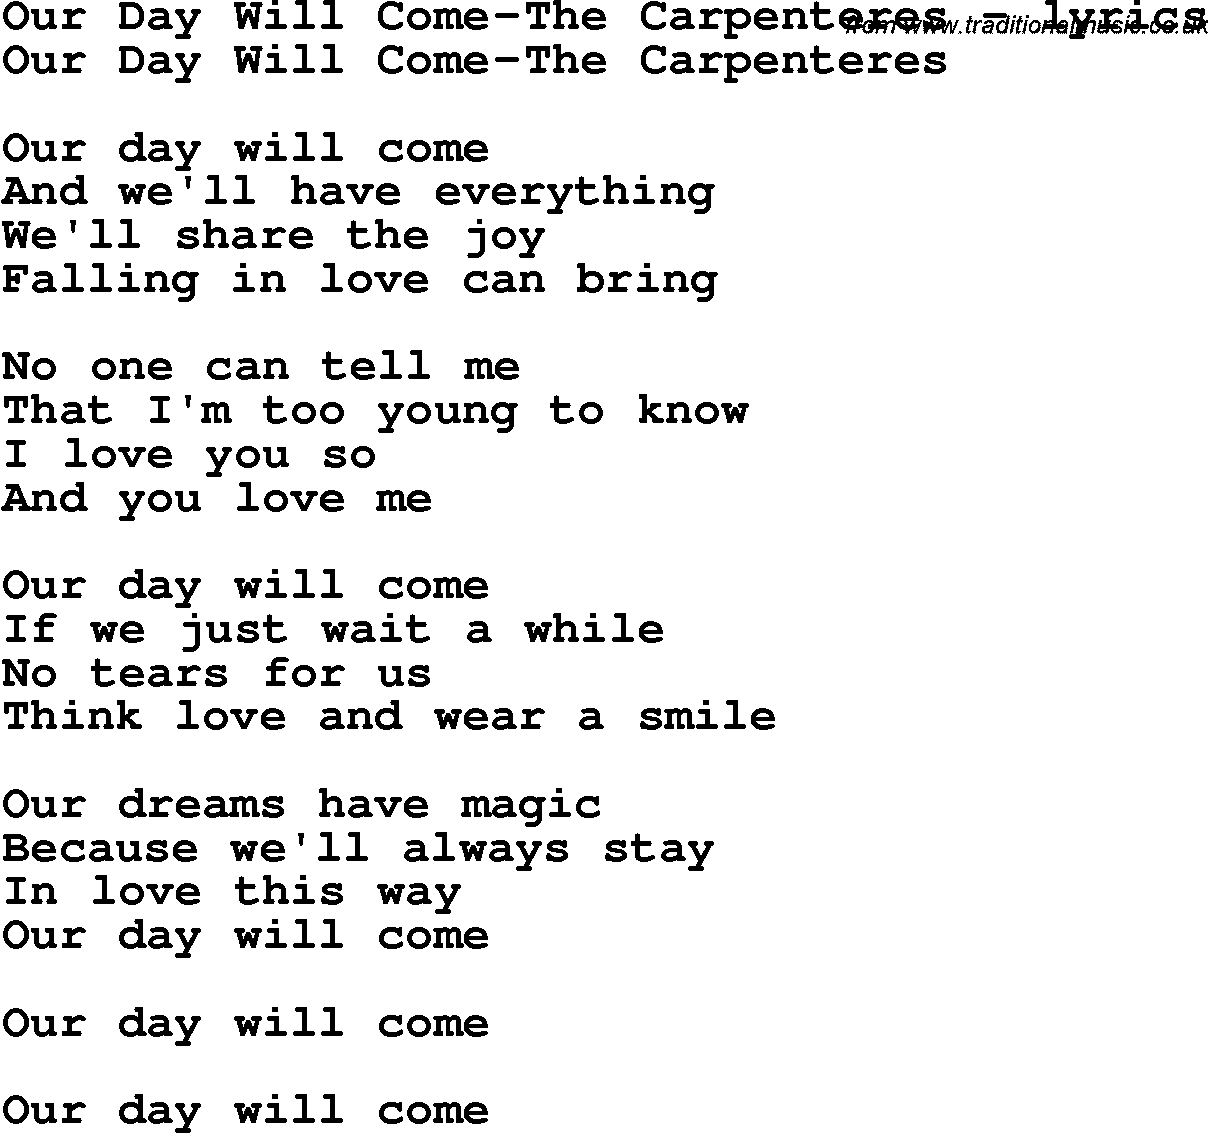 Love Song Lyrics for: Our Day Will Come-The Carpenteres